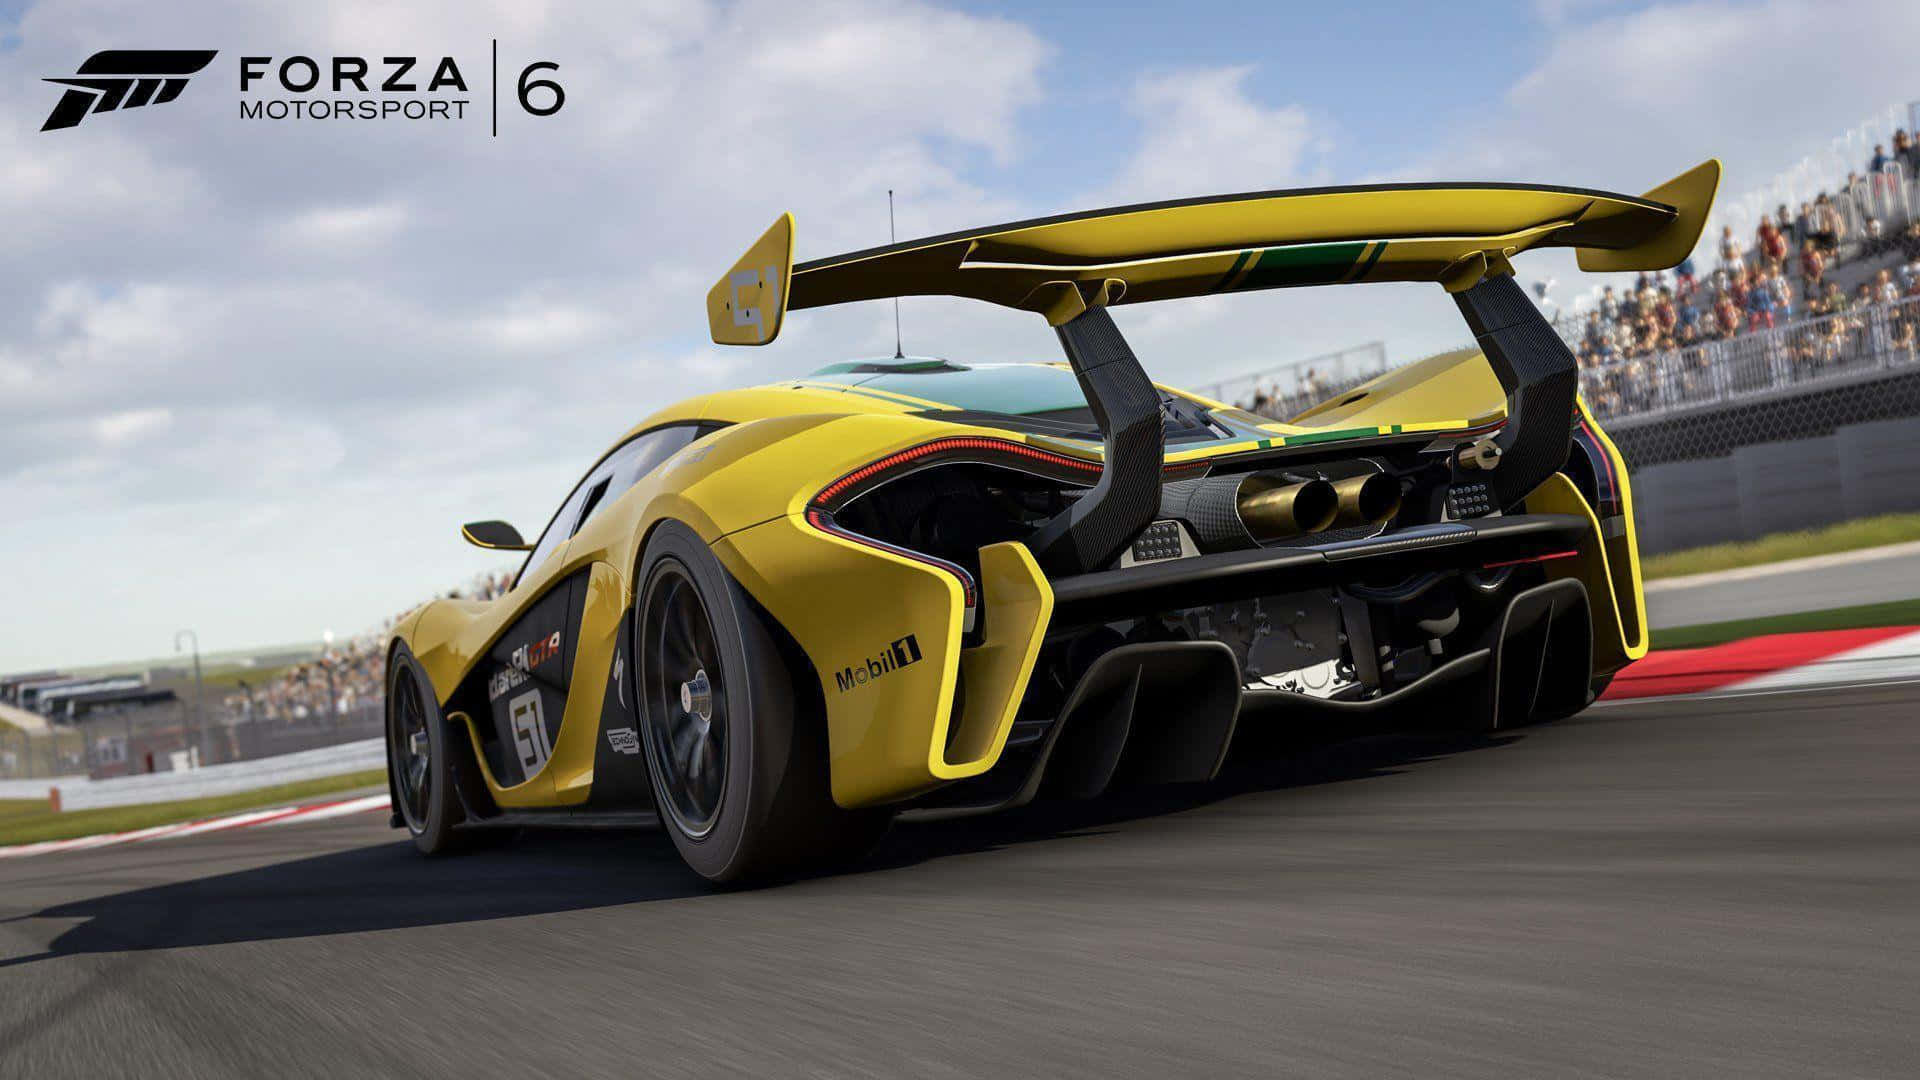 Forza Motorsport 6 Is Offering the Ford GT Race Car As a Free Download